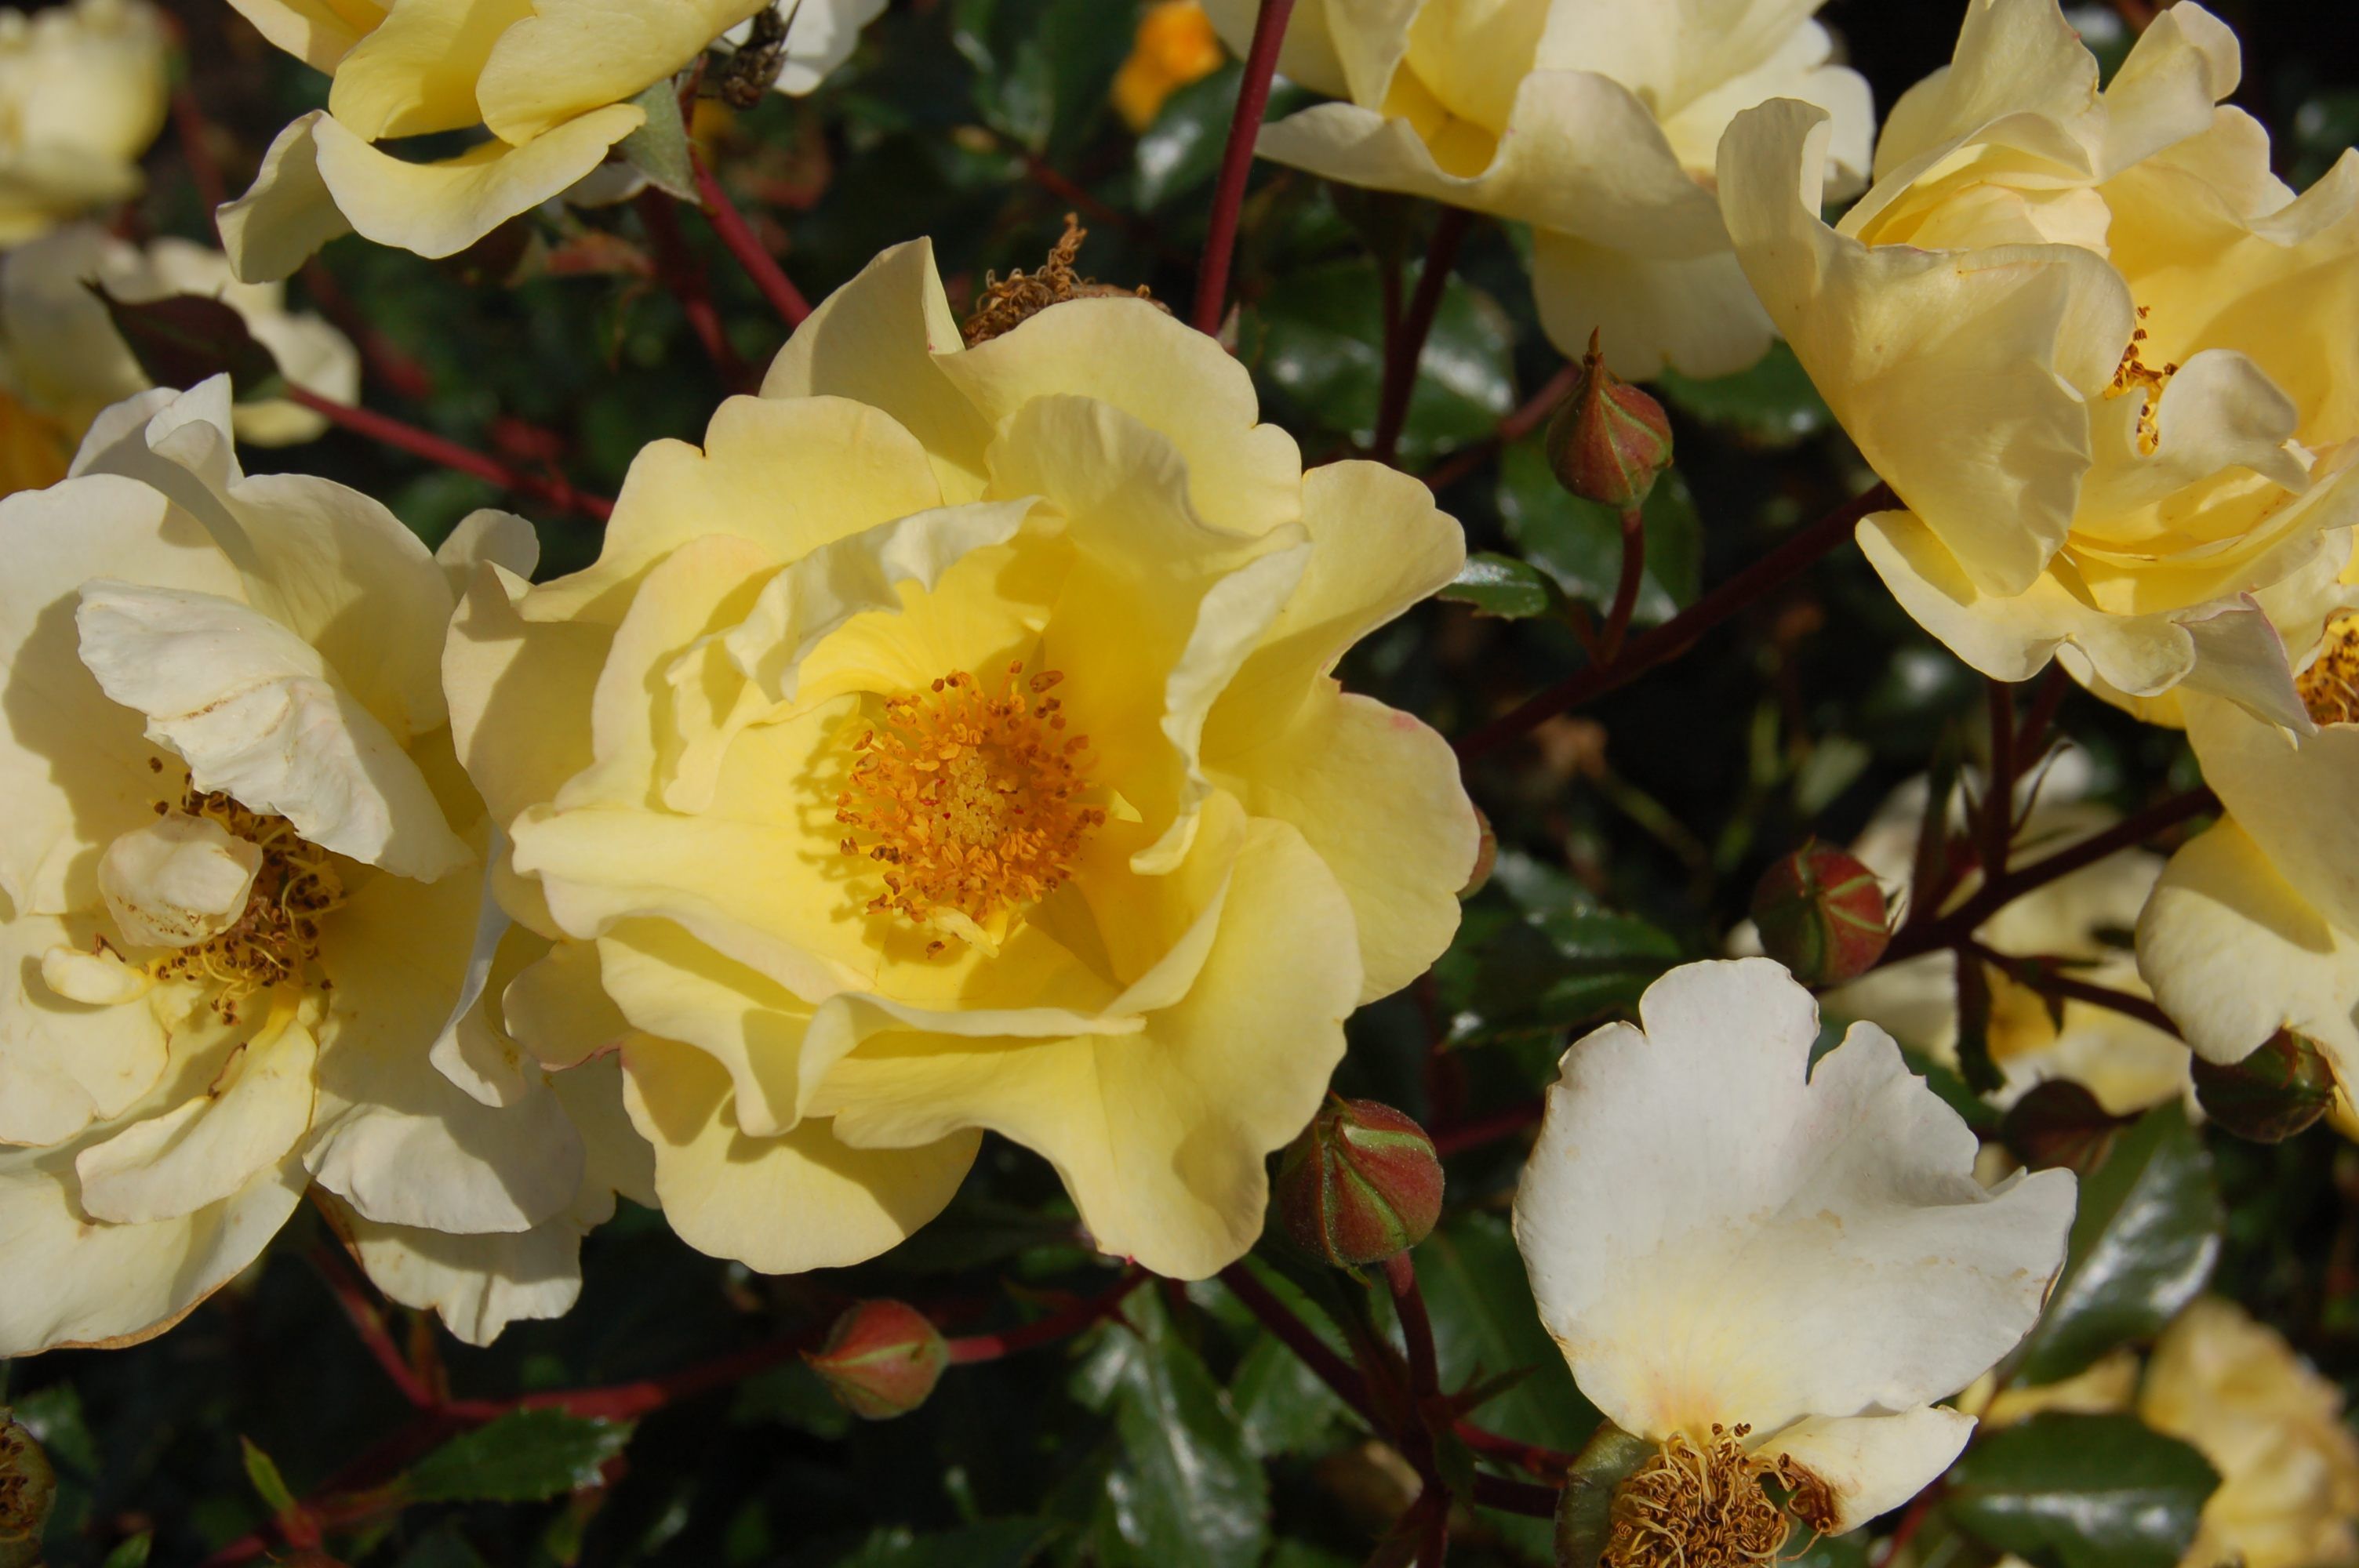 images/plants/rosa/ros-nitty-gritty-yellow/ros-nitty-gritty-yellow-0001.jpg